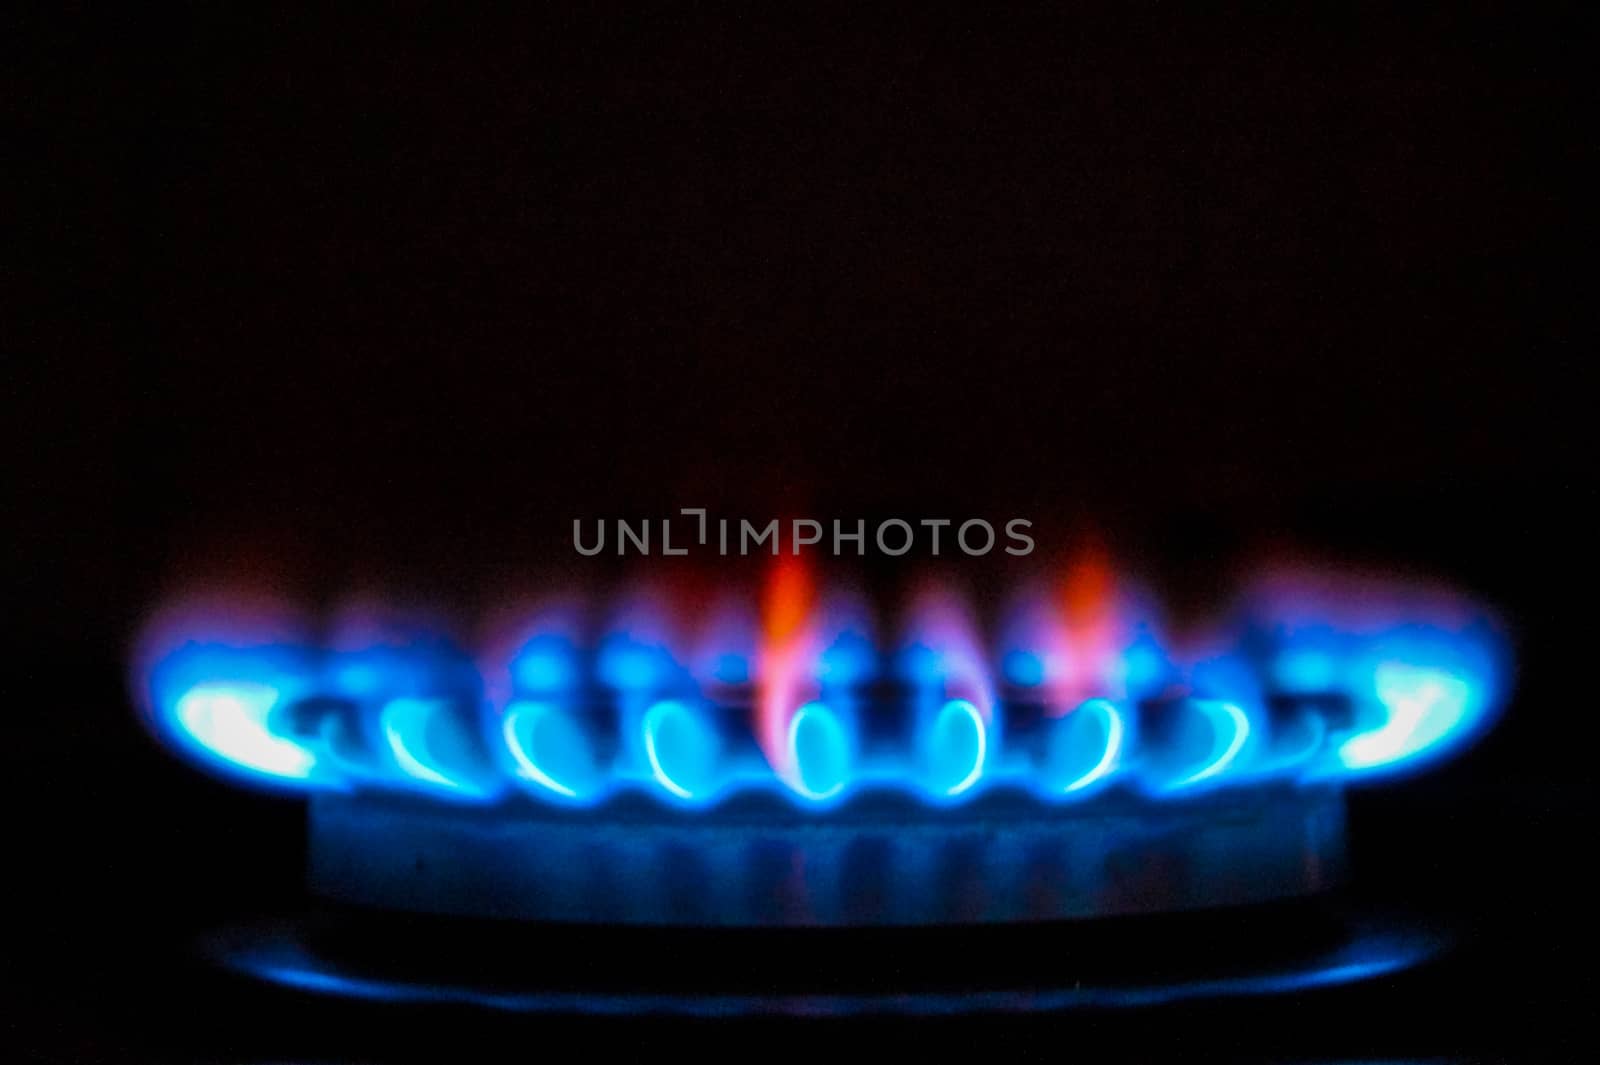 the fire of the gas stove over black background by Oleczka11